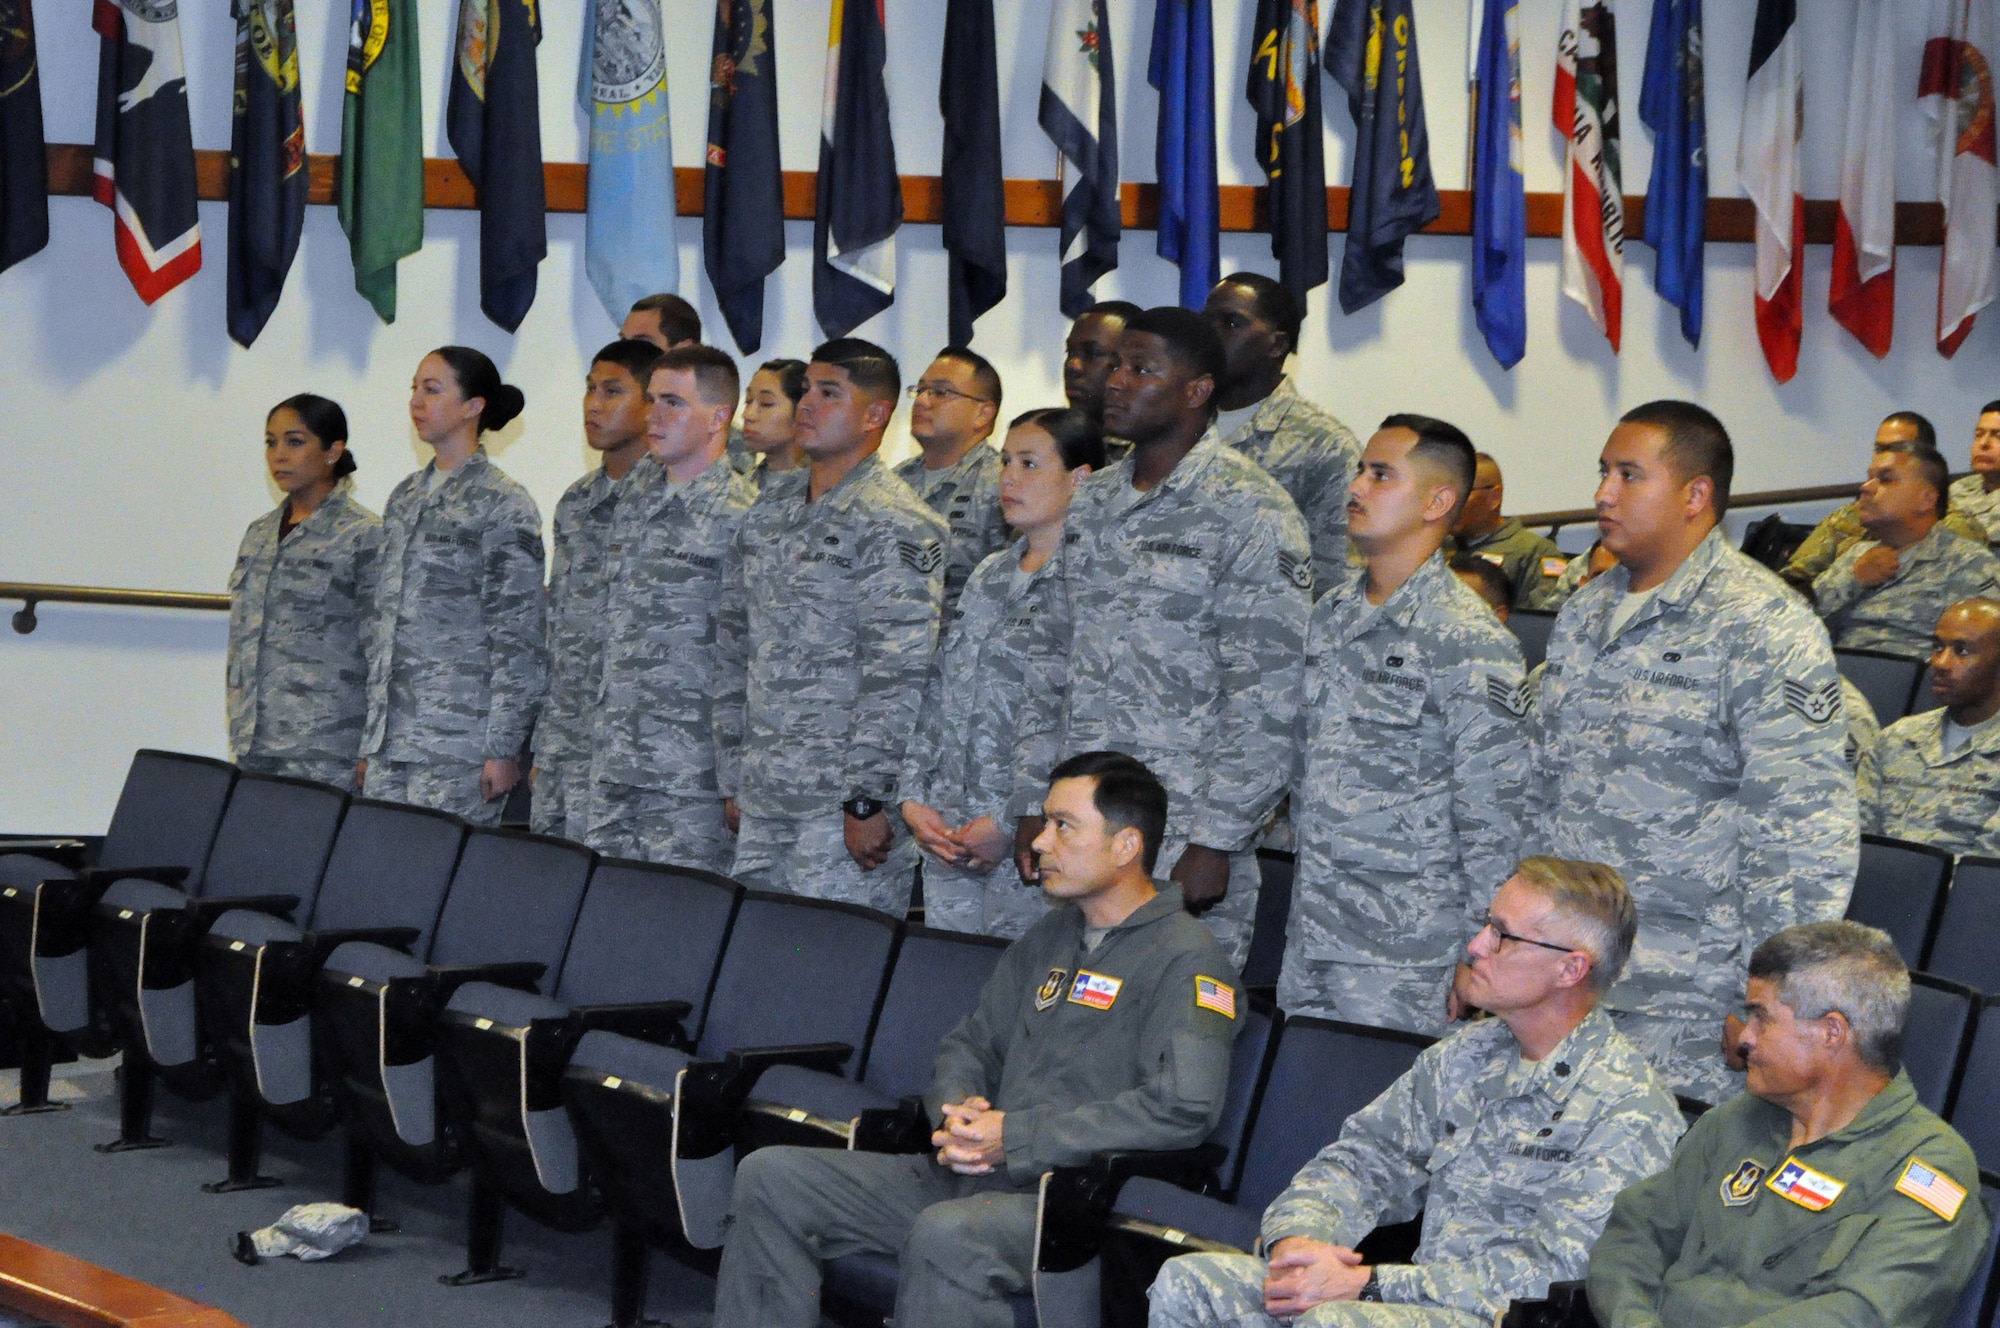 Reserve Citizen Airmen stand as they are recognized during an induction ceremony before reciting the oath of the noncommissioned officer July 13, 2019 at the Robert D. Gaylor NCO Academy, Joint Base San Antonio-Lackland, Texas.